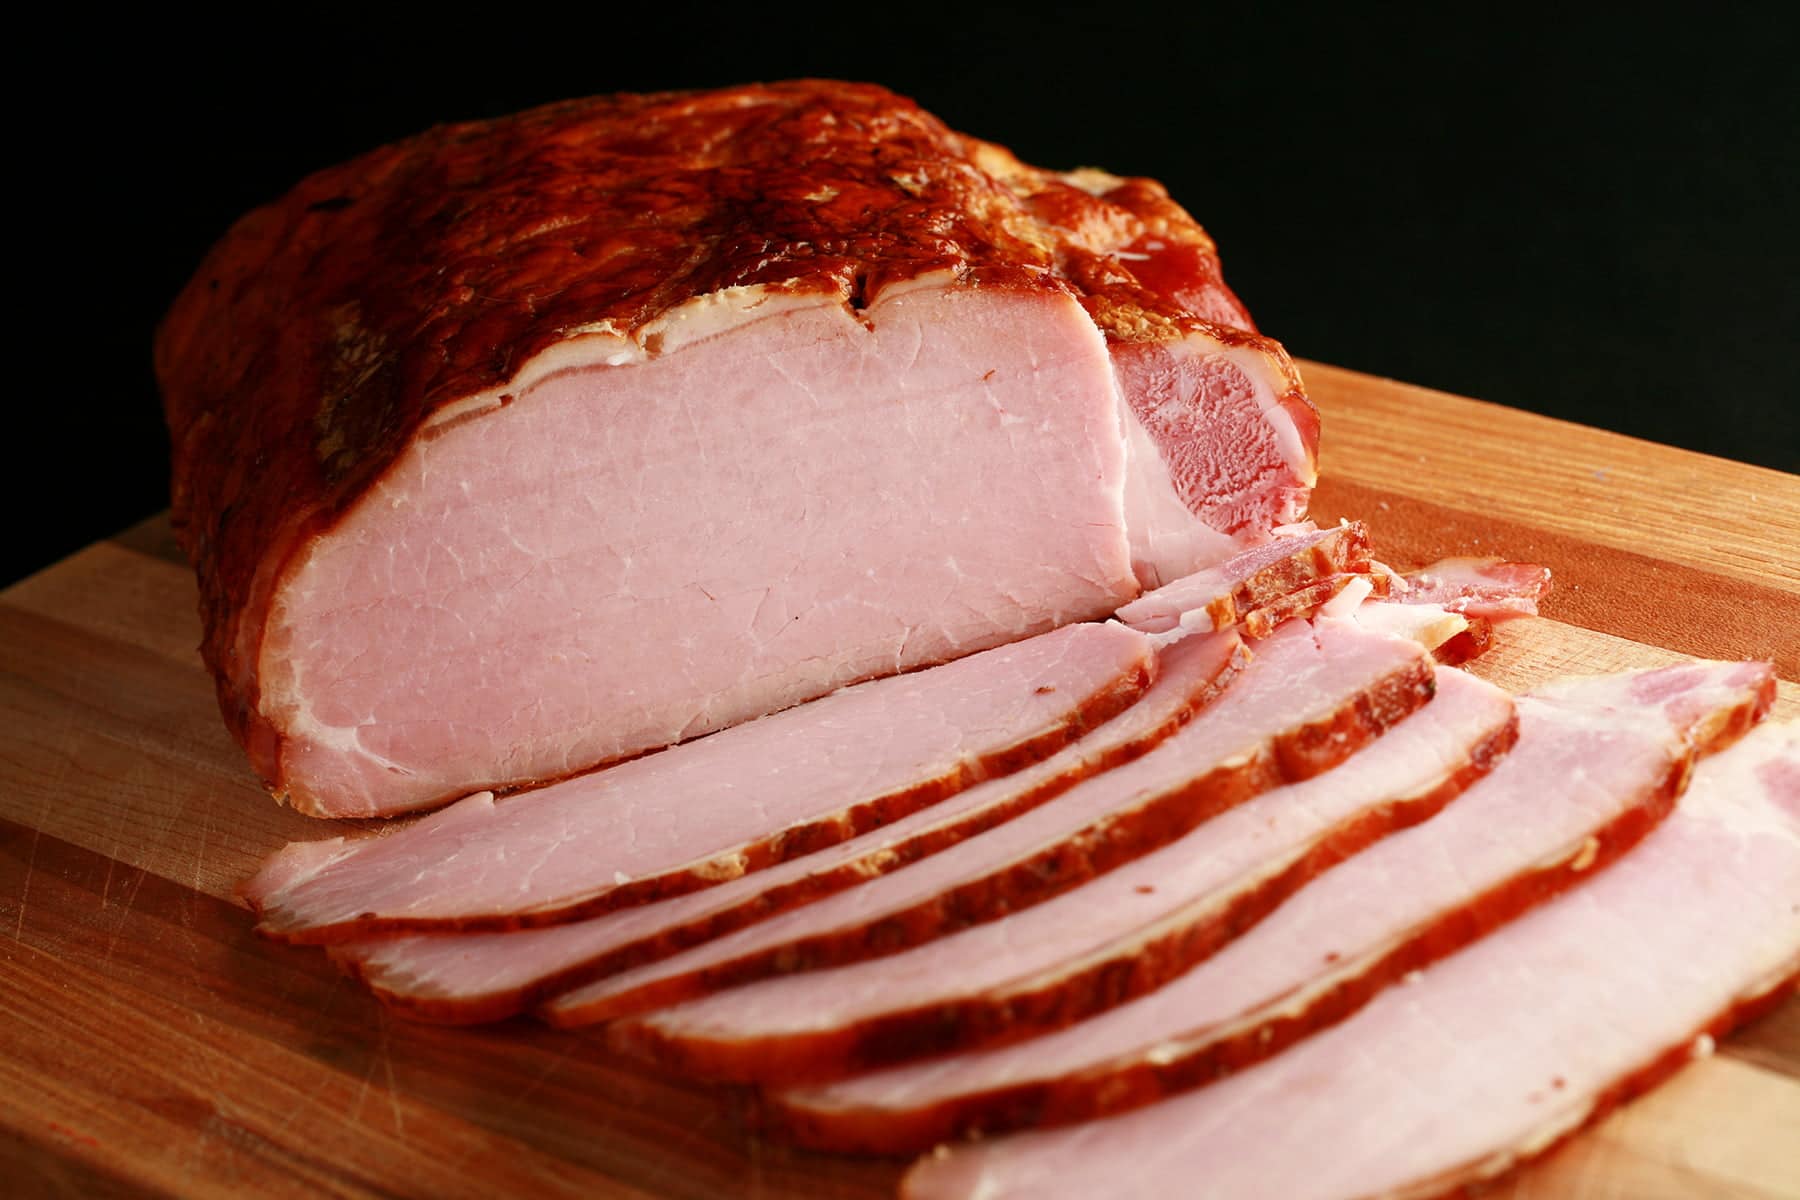 A cured and smoked pork loin, sliced - proper back bacon!